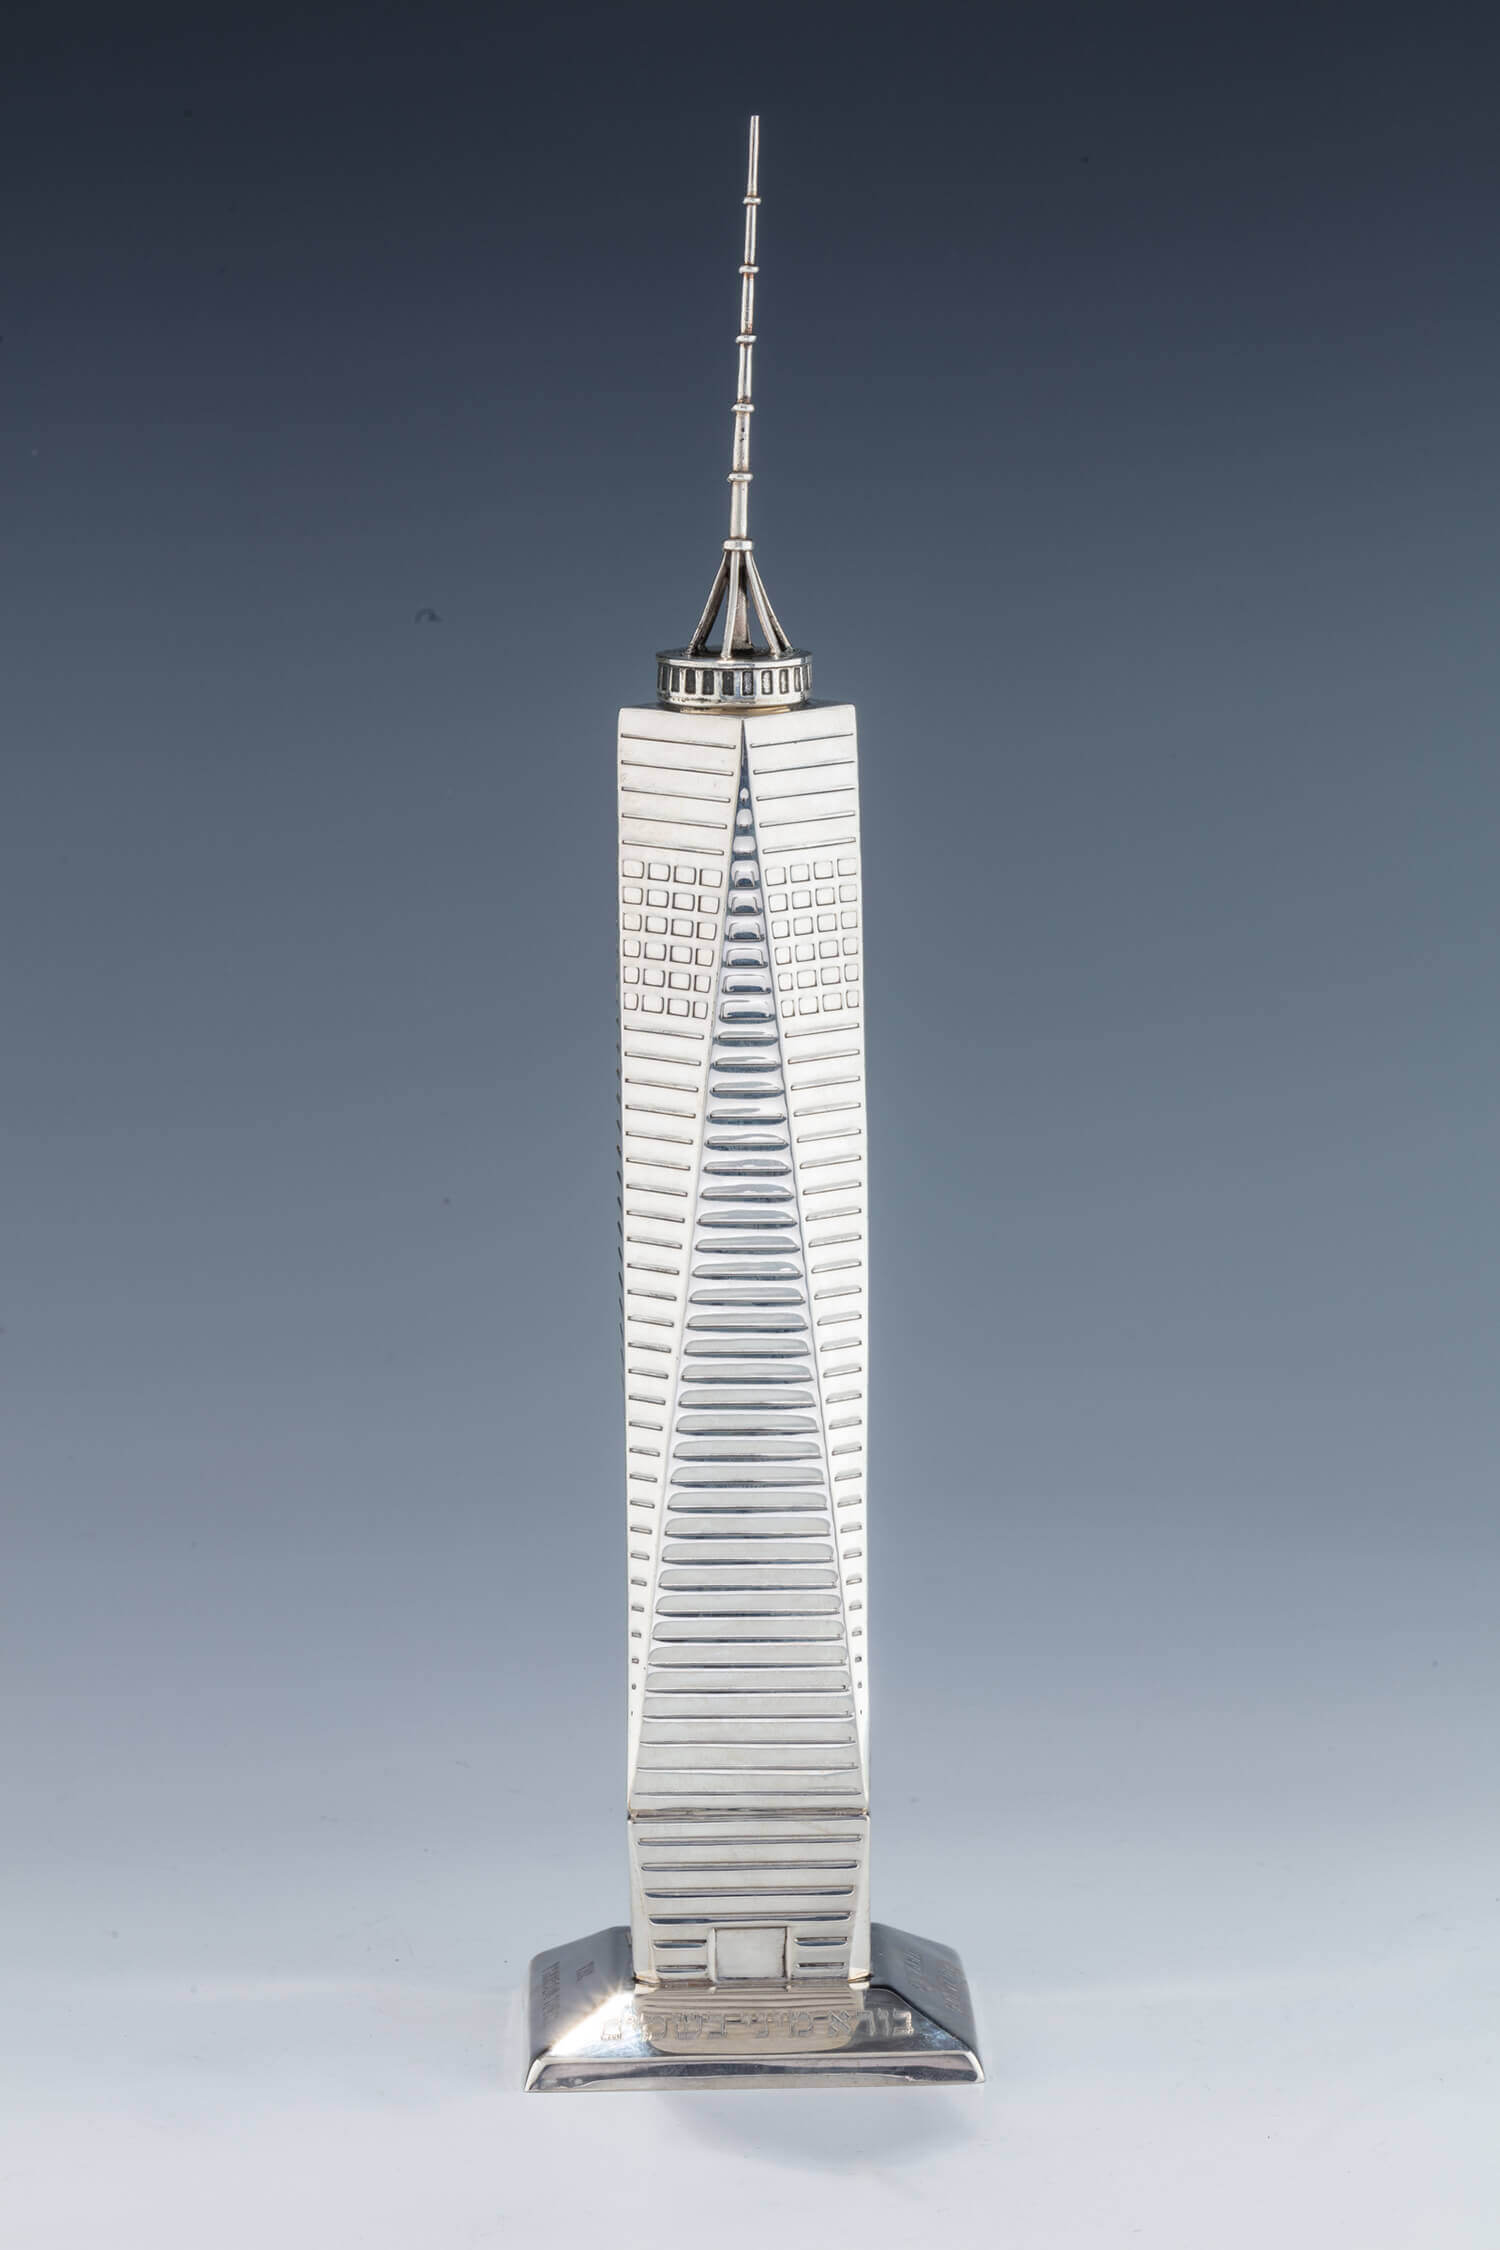 143. THE STERLING FREEDOM TOWER SPICE CONTAINER BY TOMMY GELB